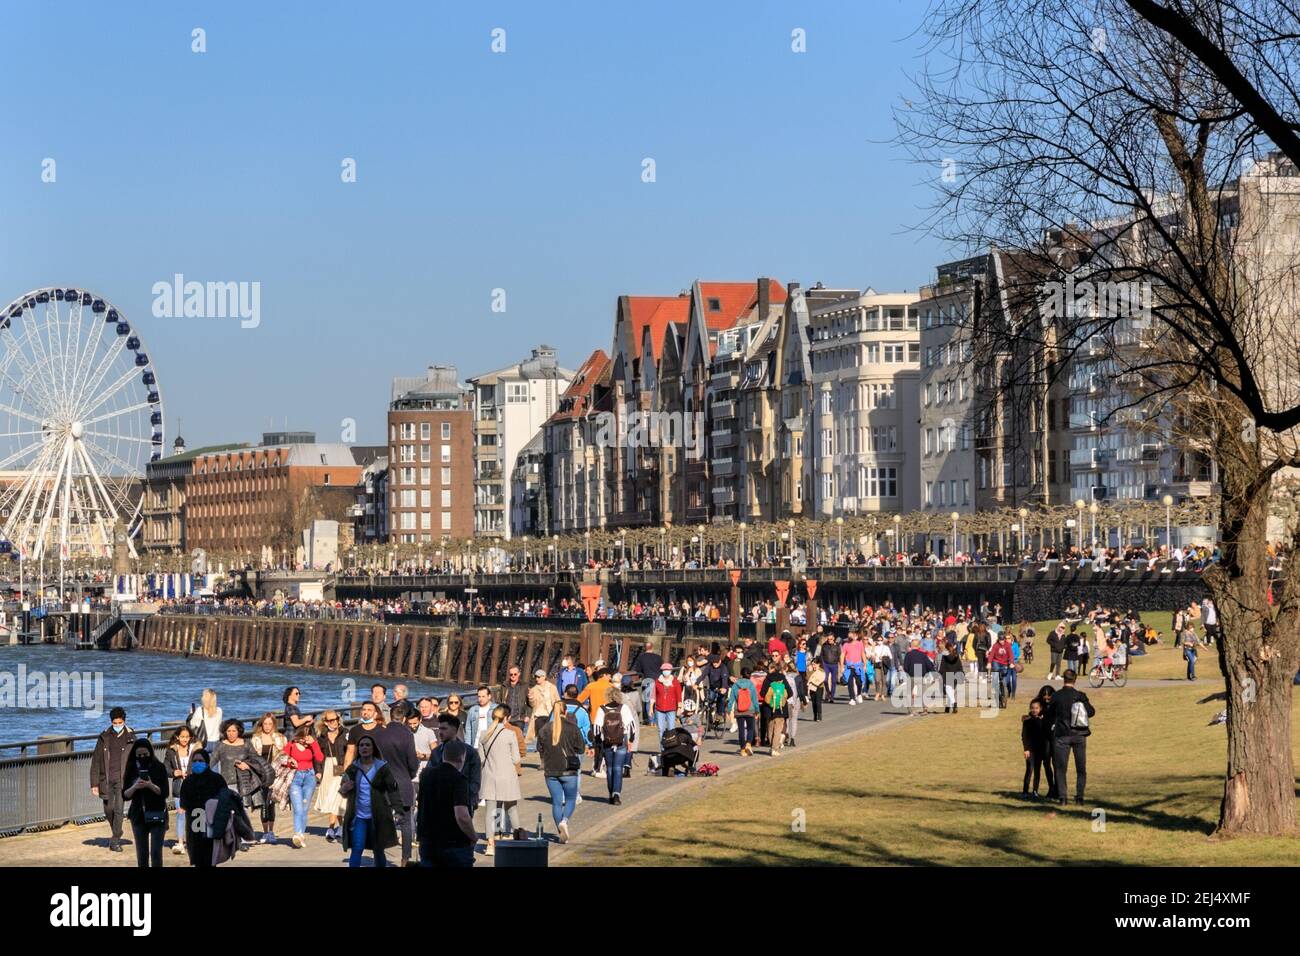 Düsseldorf, NRW, 2021. People enjoy their Sunday afternoon in beautiful warm sunshine with temperatures up to 18 degrees, strolling along the River Rhine in Düsseldorf, the capital of Germany's most populous state of North Rhine-Westphalia. Credit: Imageplotter/Alamy Live News Stock Photo